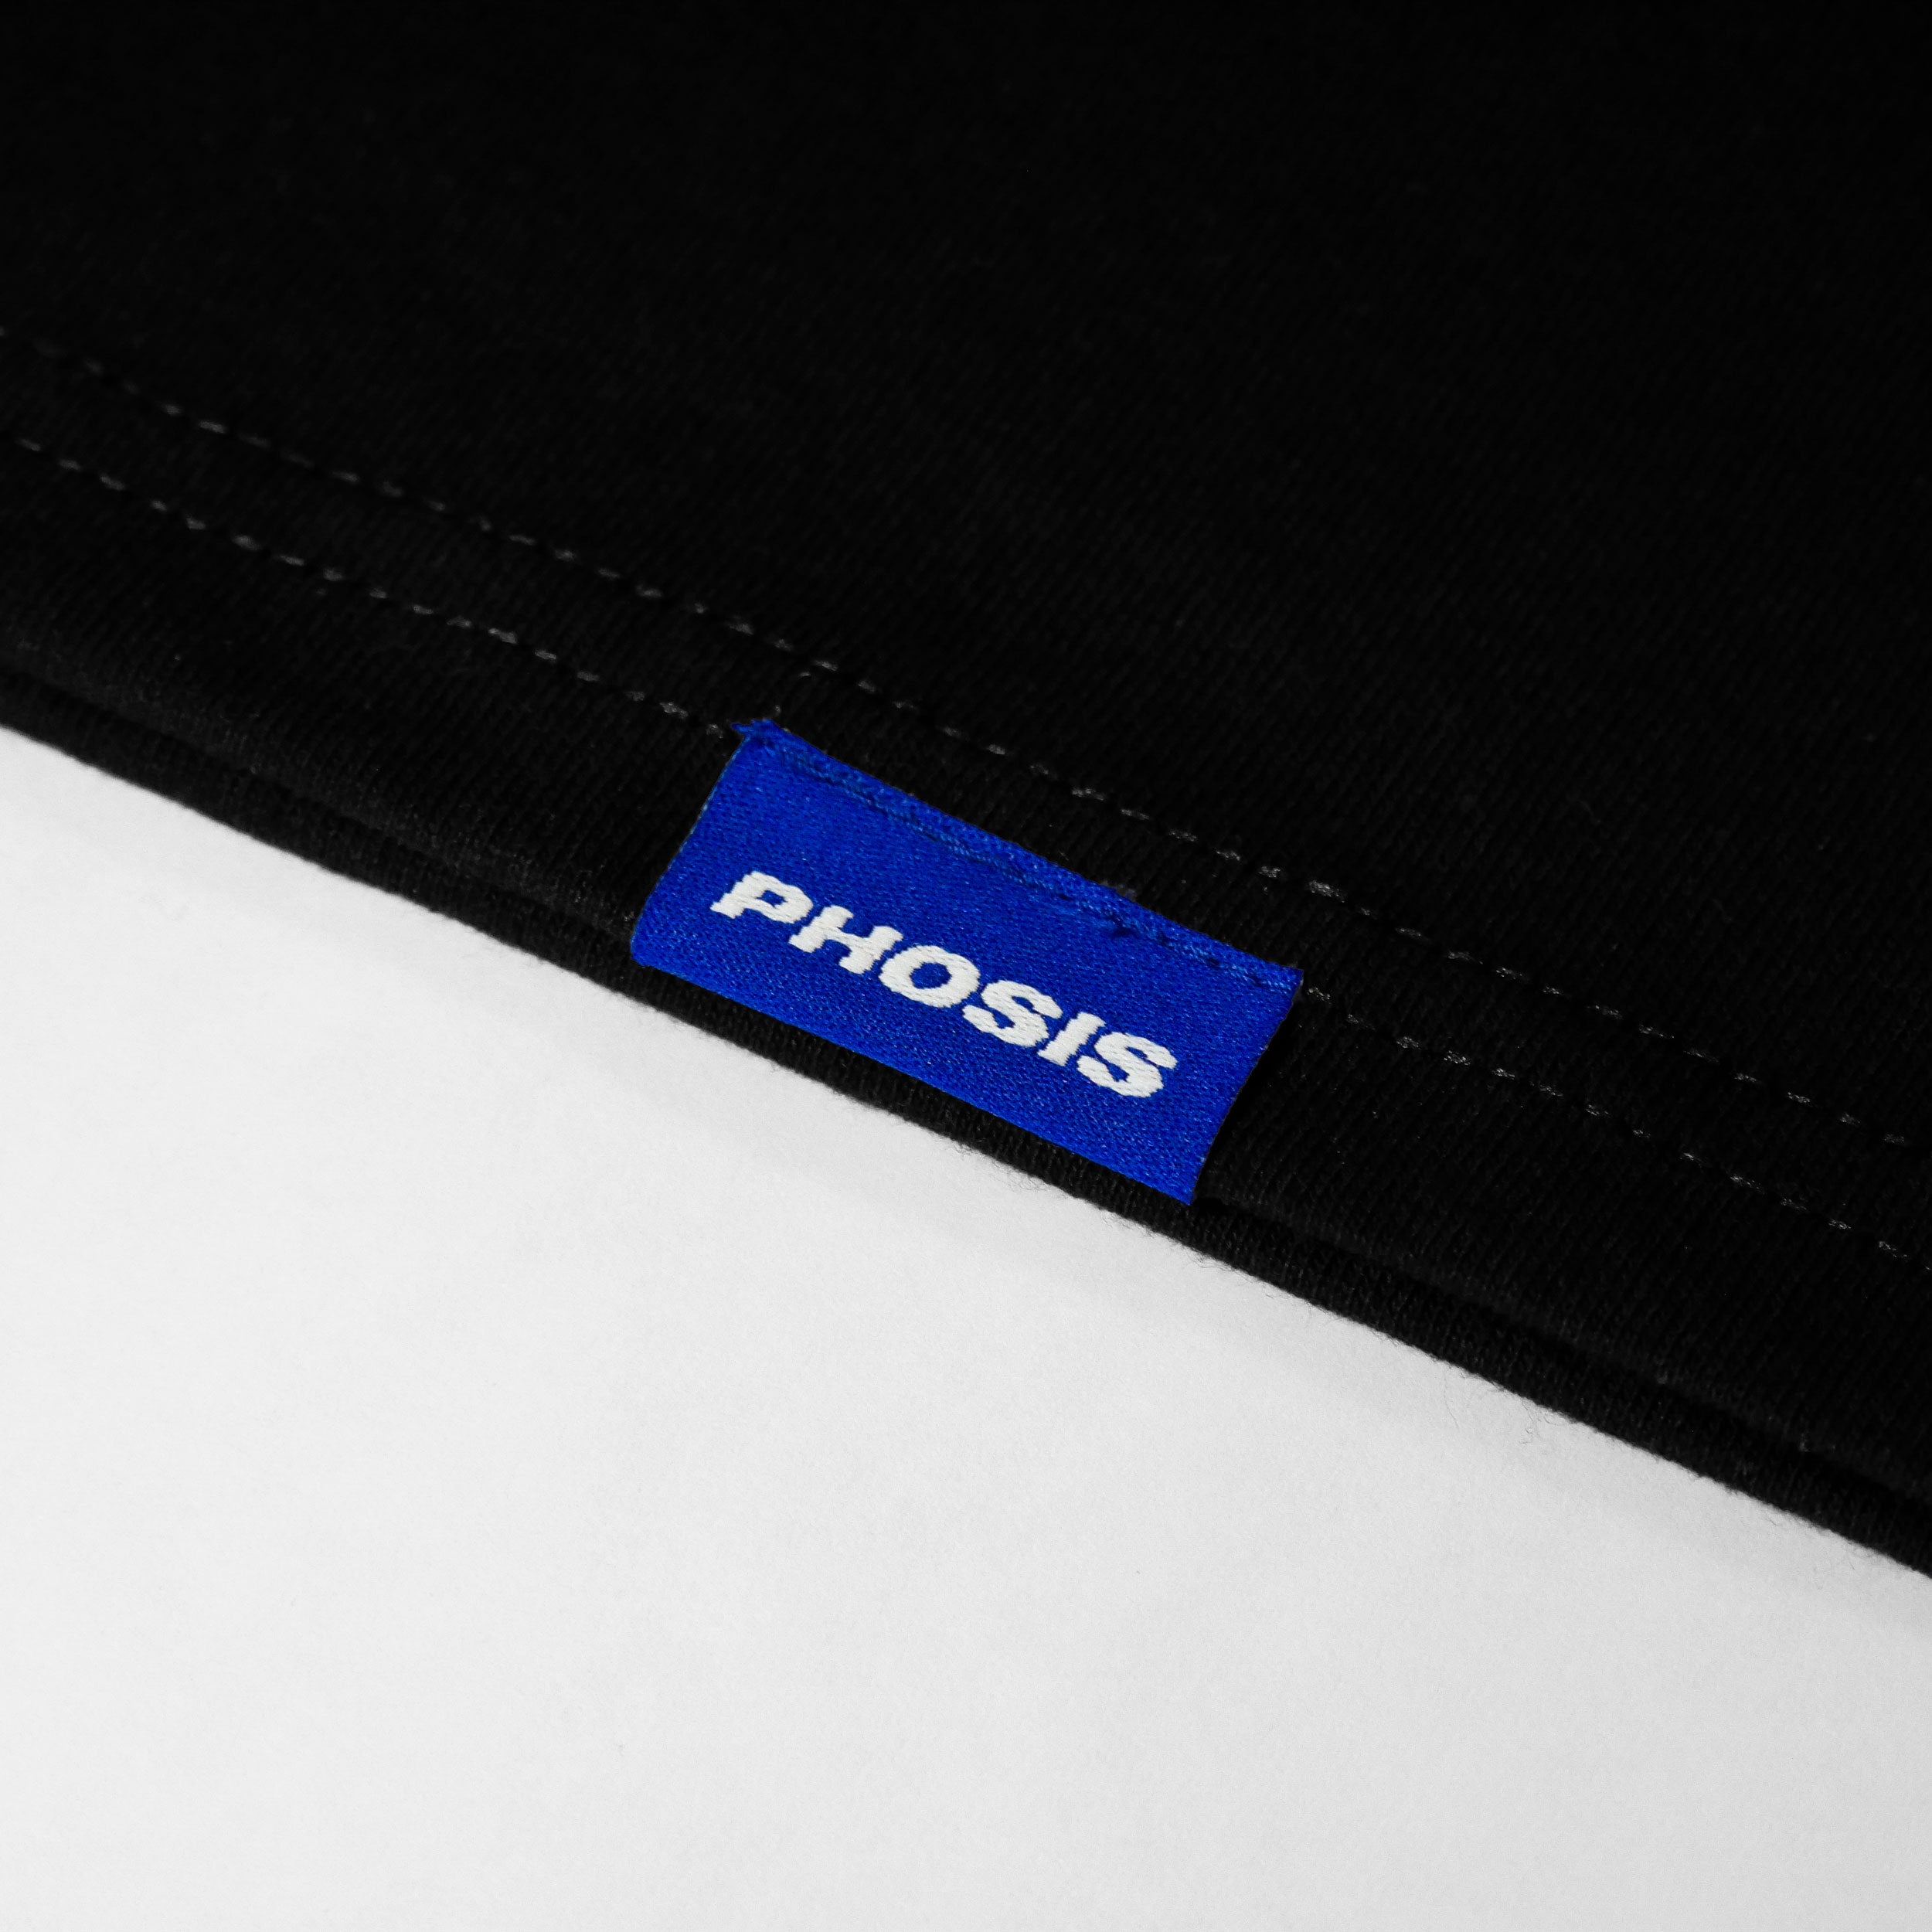 Close up view of the blue woven label in the LONELY DUNES black heavyweight cotton t-shirt from PHOSIS® Clothing